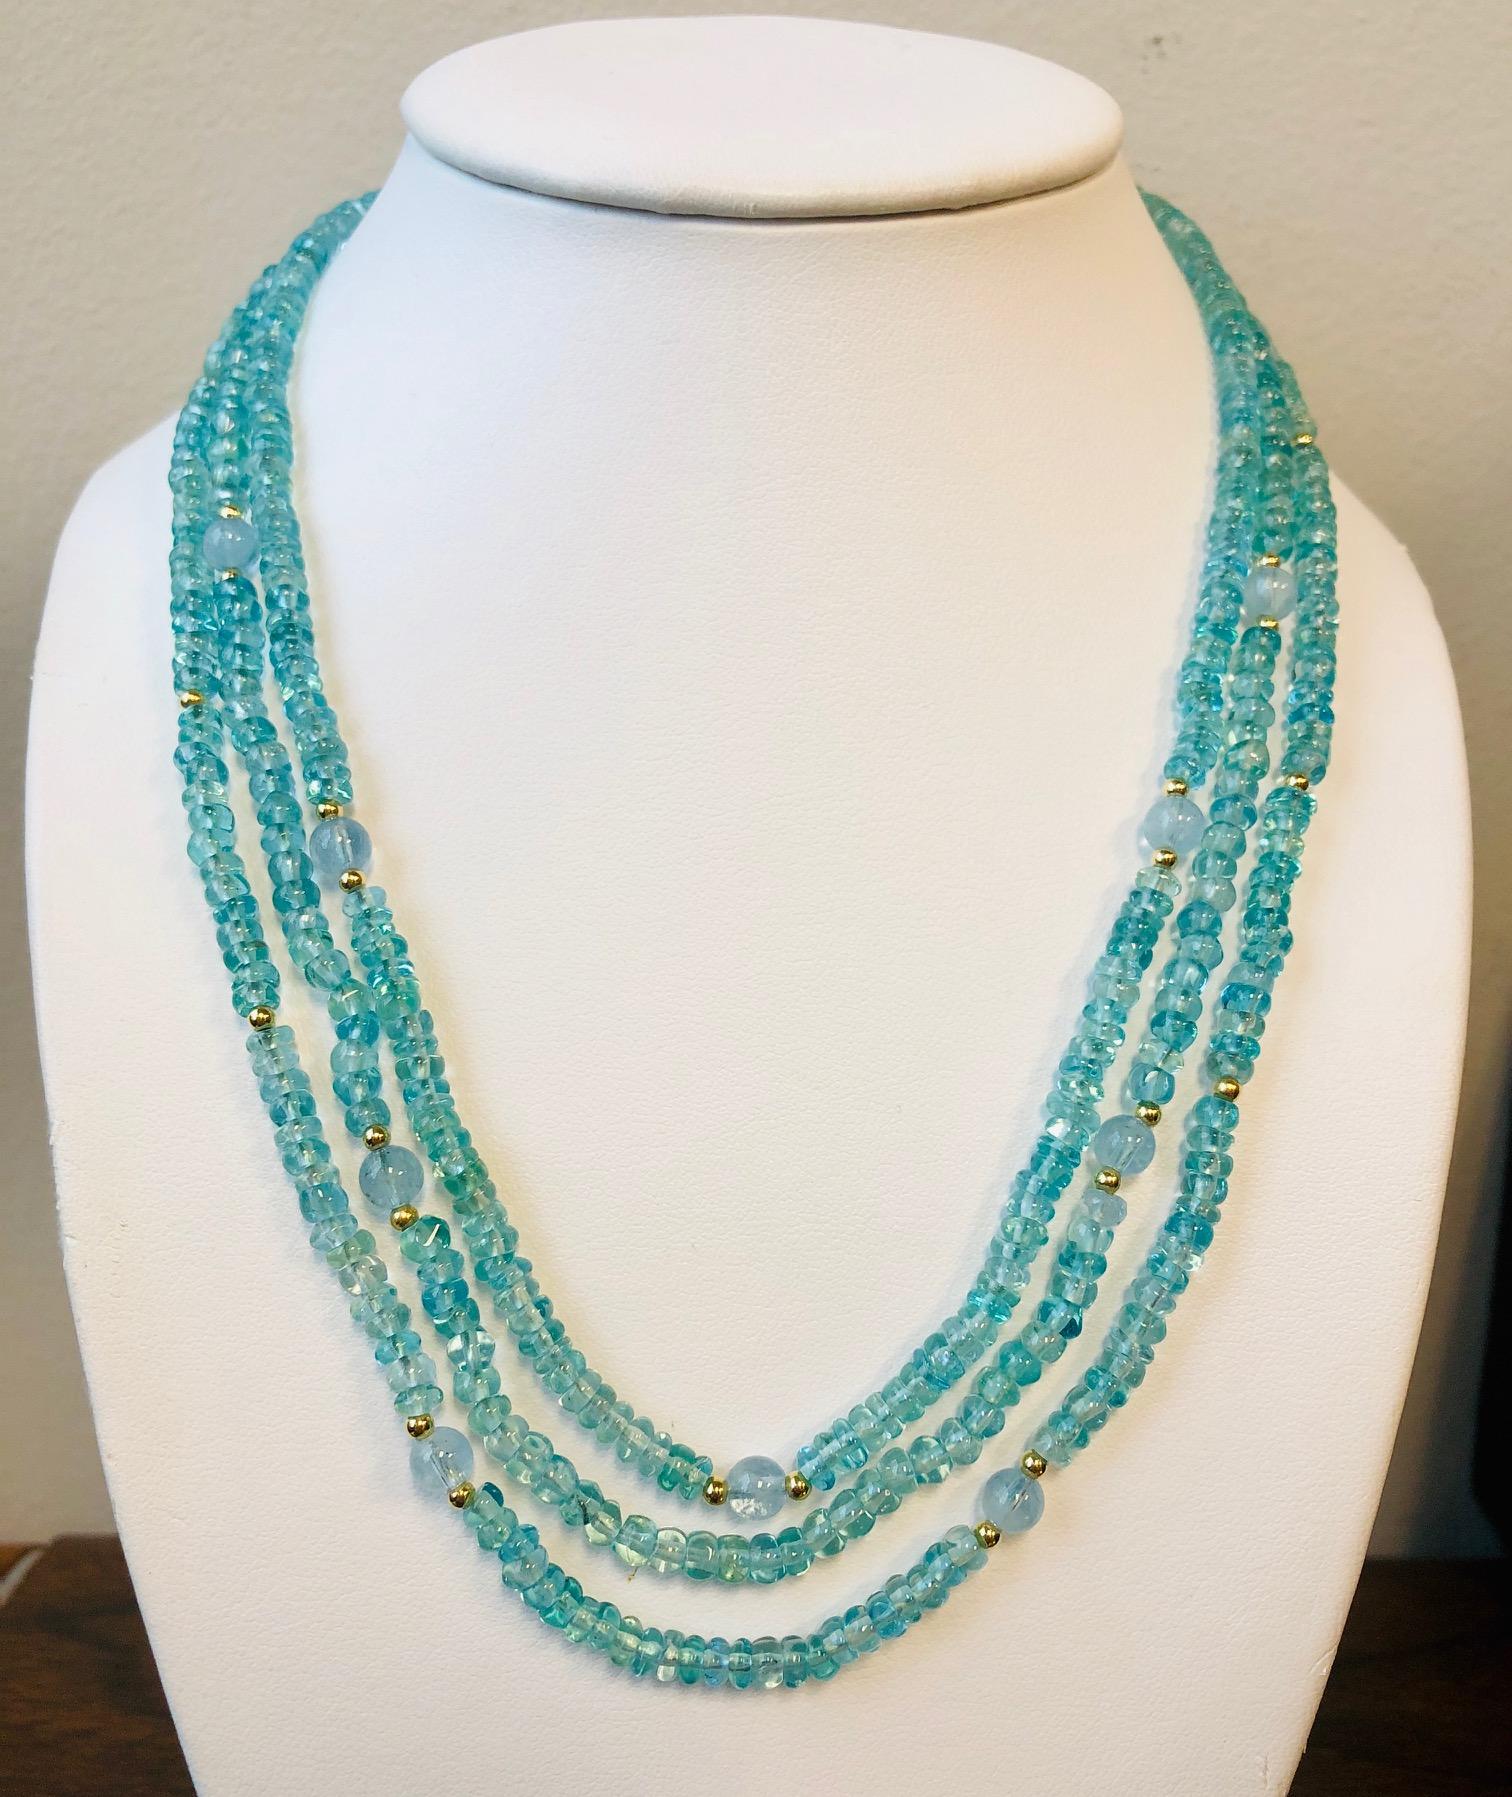 Women's Triple Strand Apatite, Aquamarine Beaded Nesting Necklace, Yellow Gold Accents